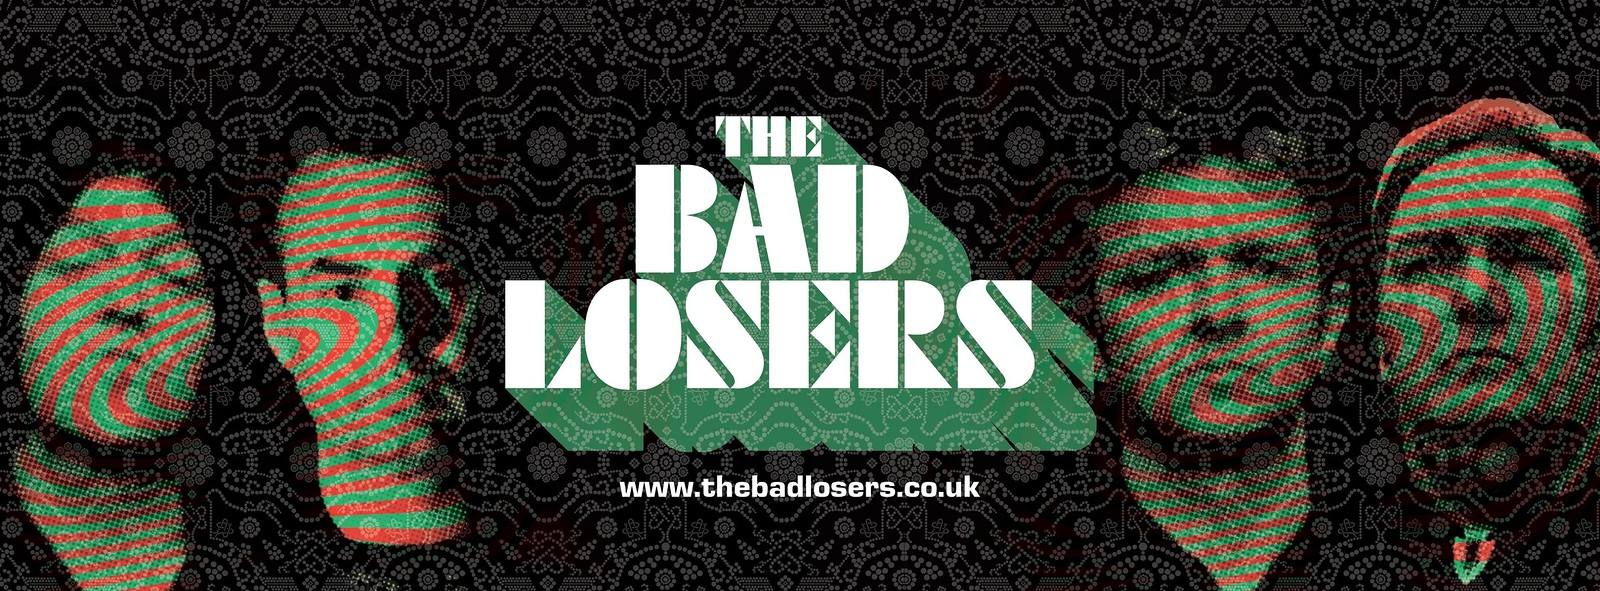 The Bad Losers & Twin Arrow at The Golden Lion